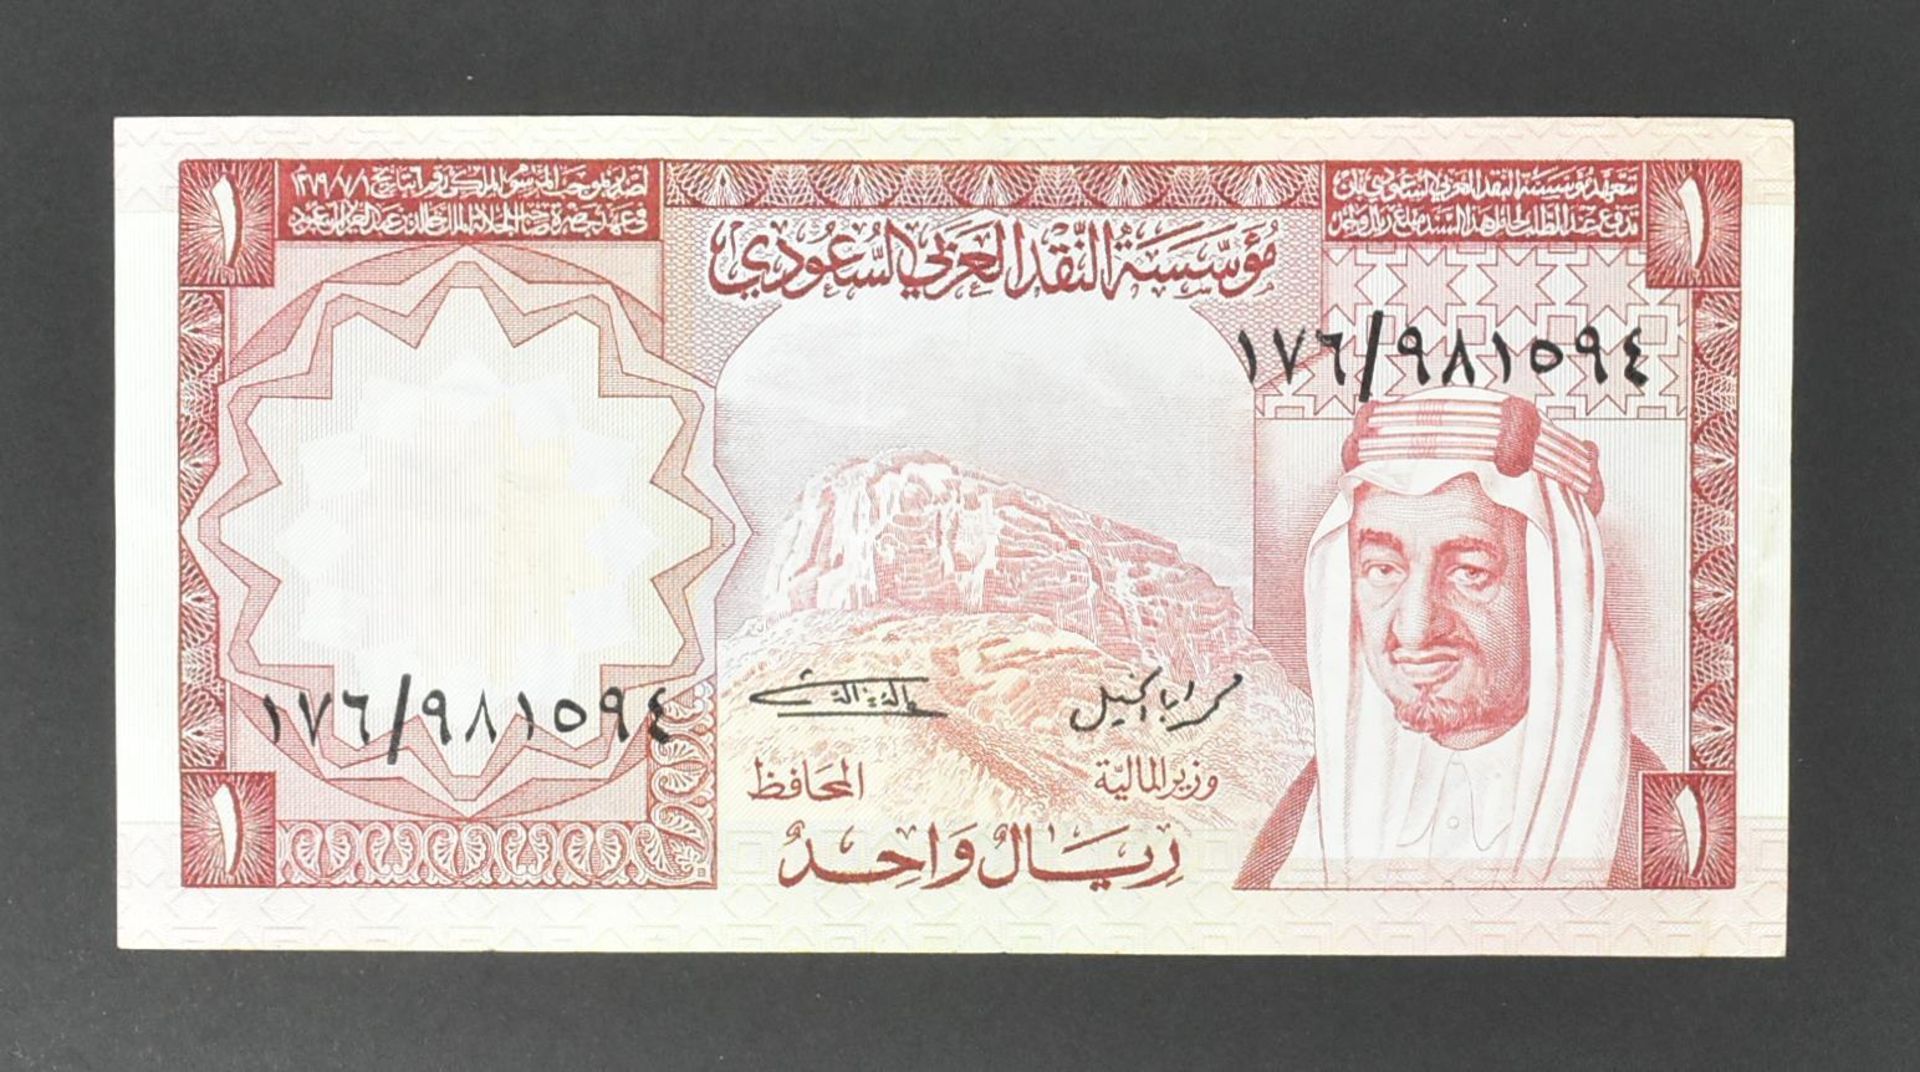 COLLECTION OF INTERNATIONAL UNCIRCULATED BANK NOTES - OMAN - Image 19 of 51